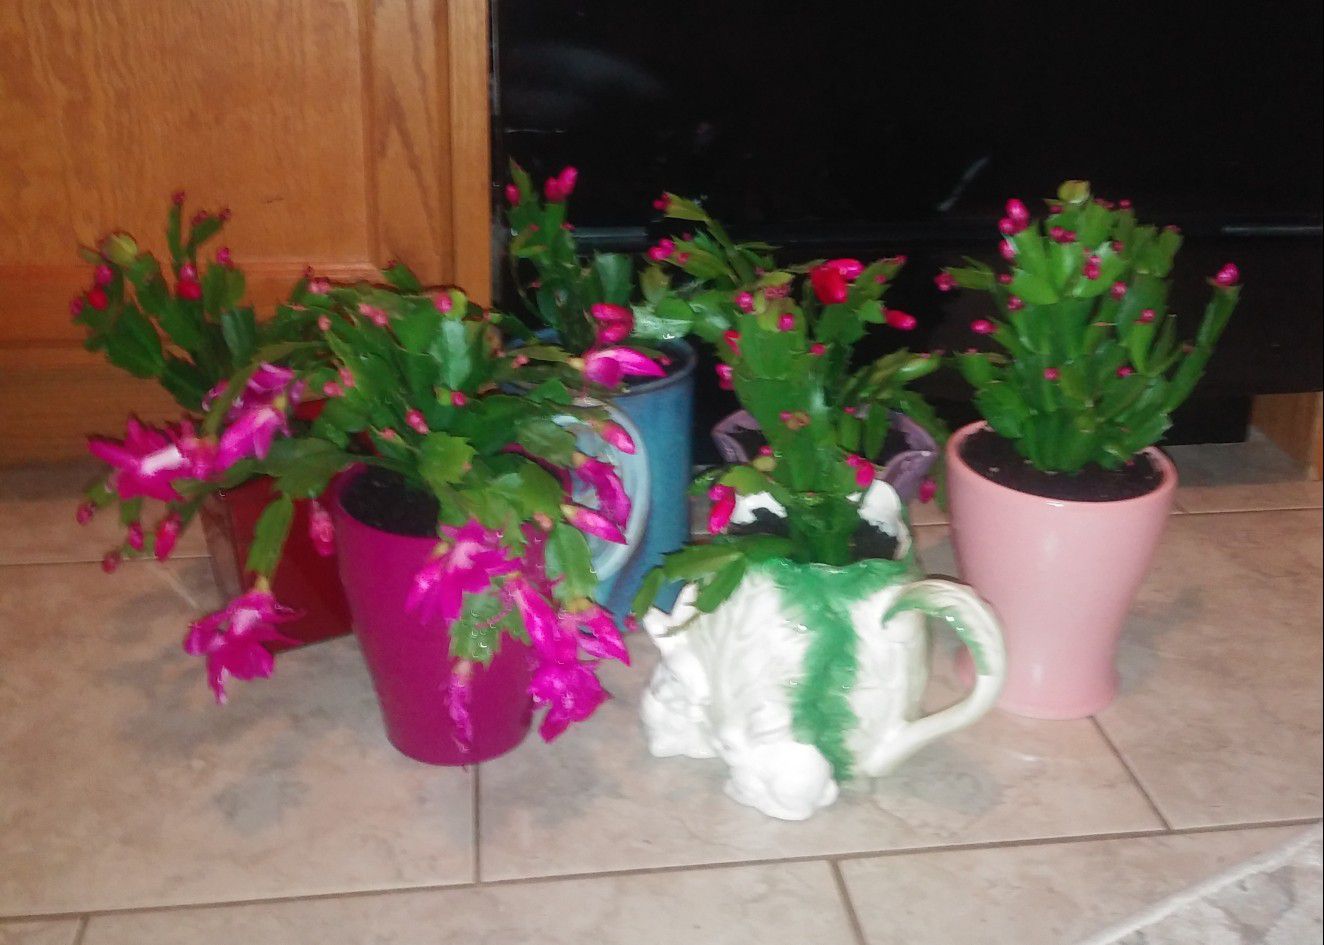 Christmas cactus house plants from 6-15 each